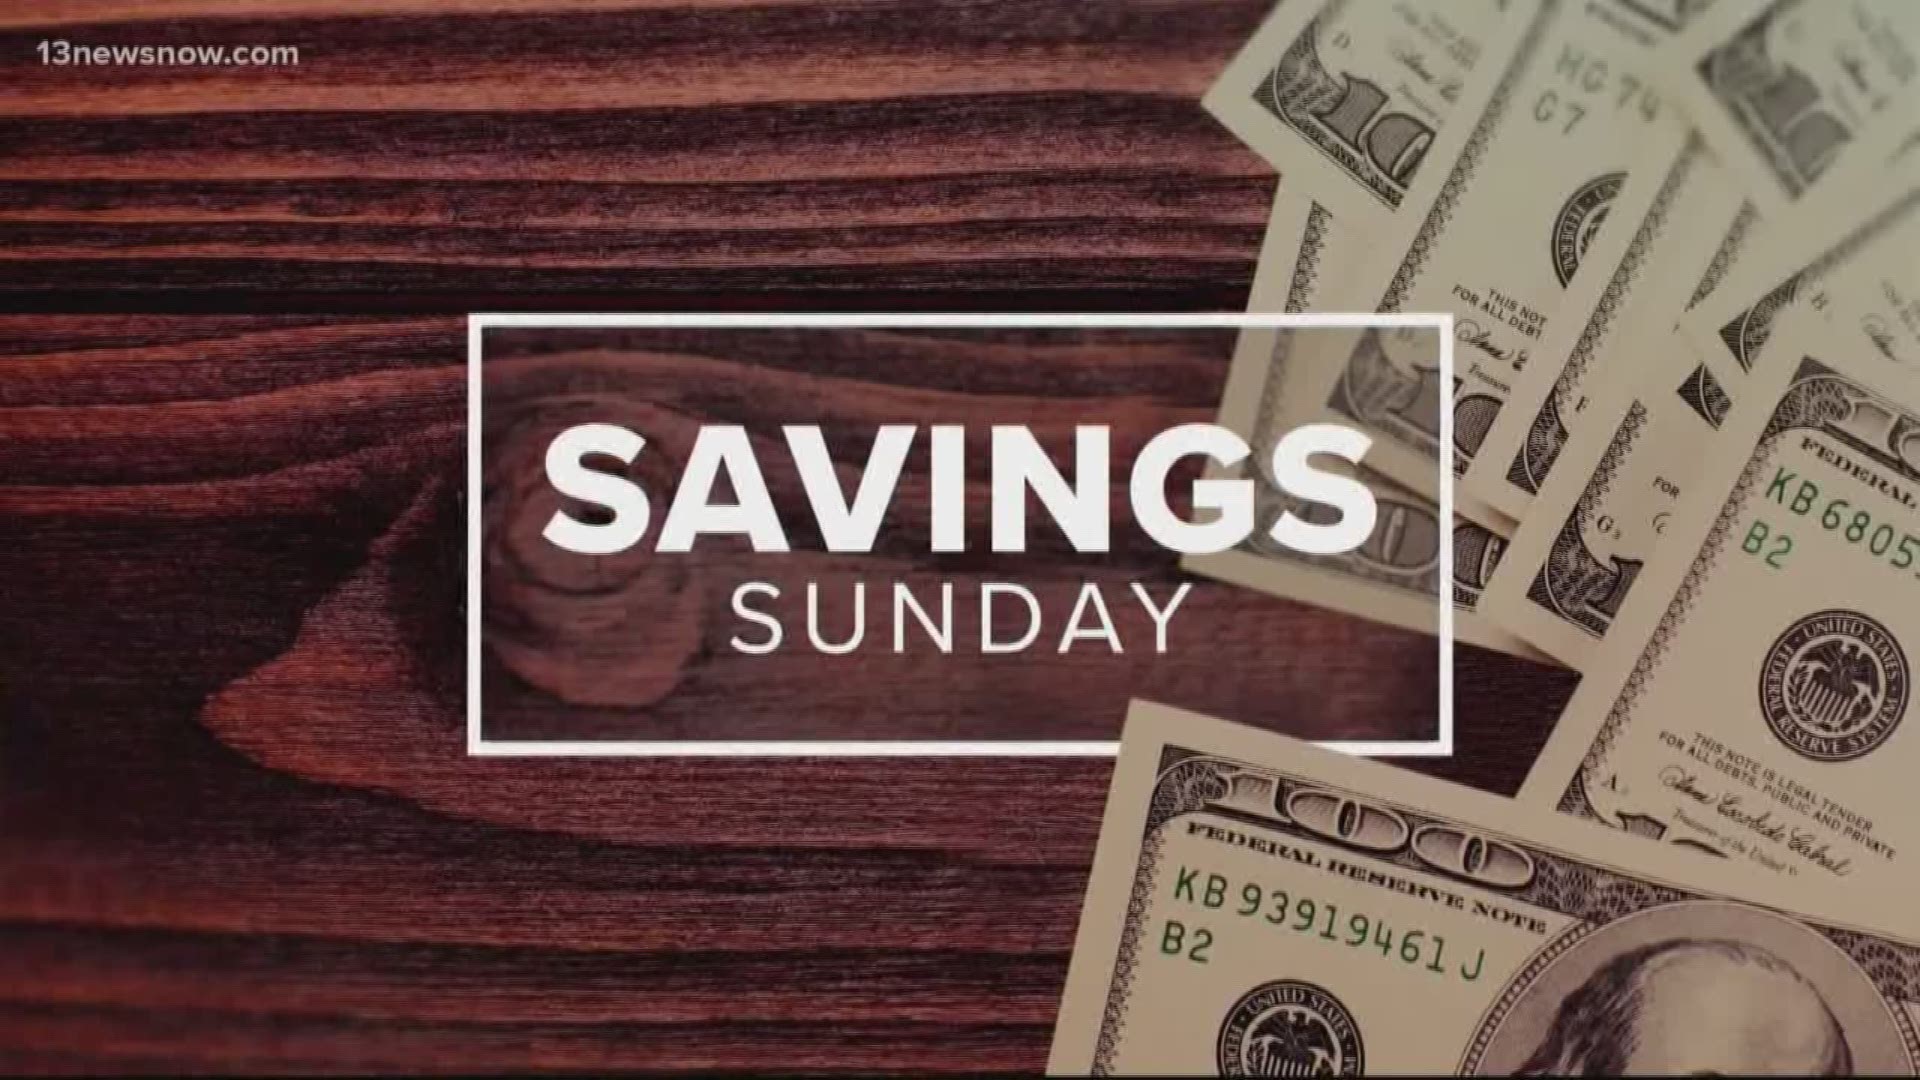 Laura Oliver from www.afrugalchick.com has your big savings for the week of May 12, 2019.